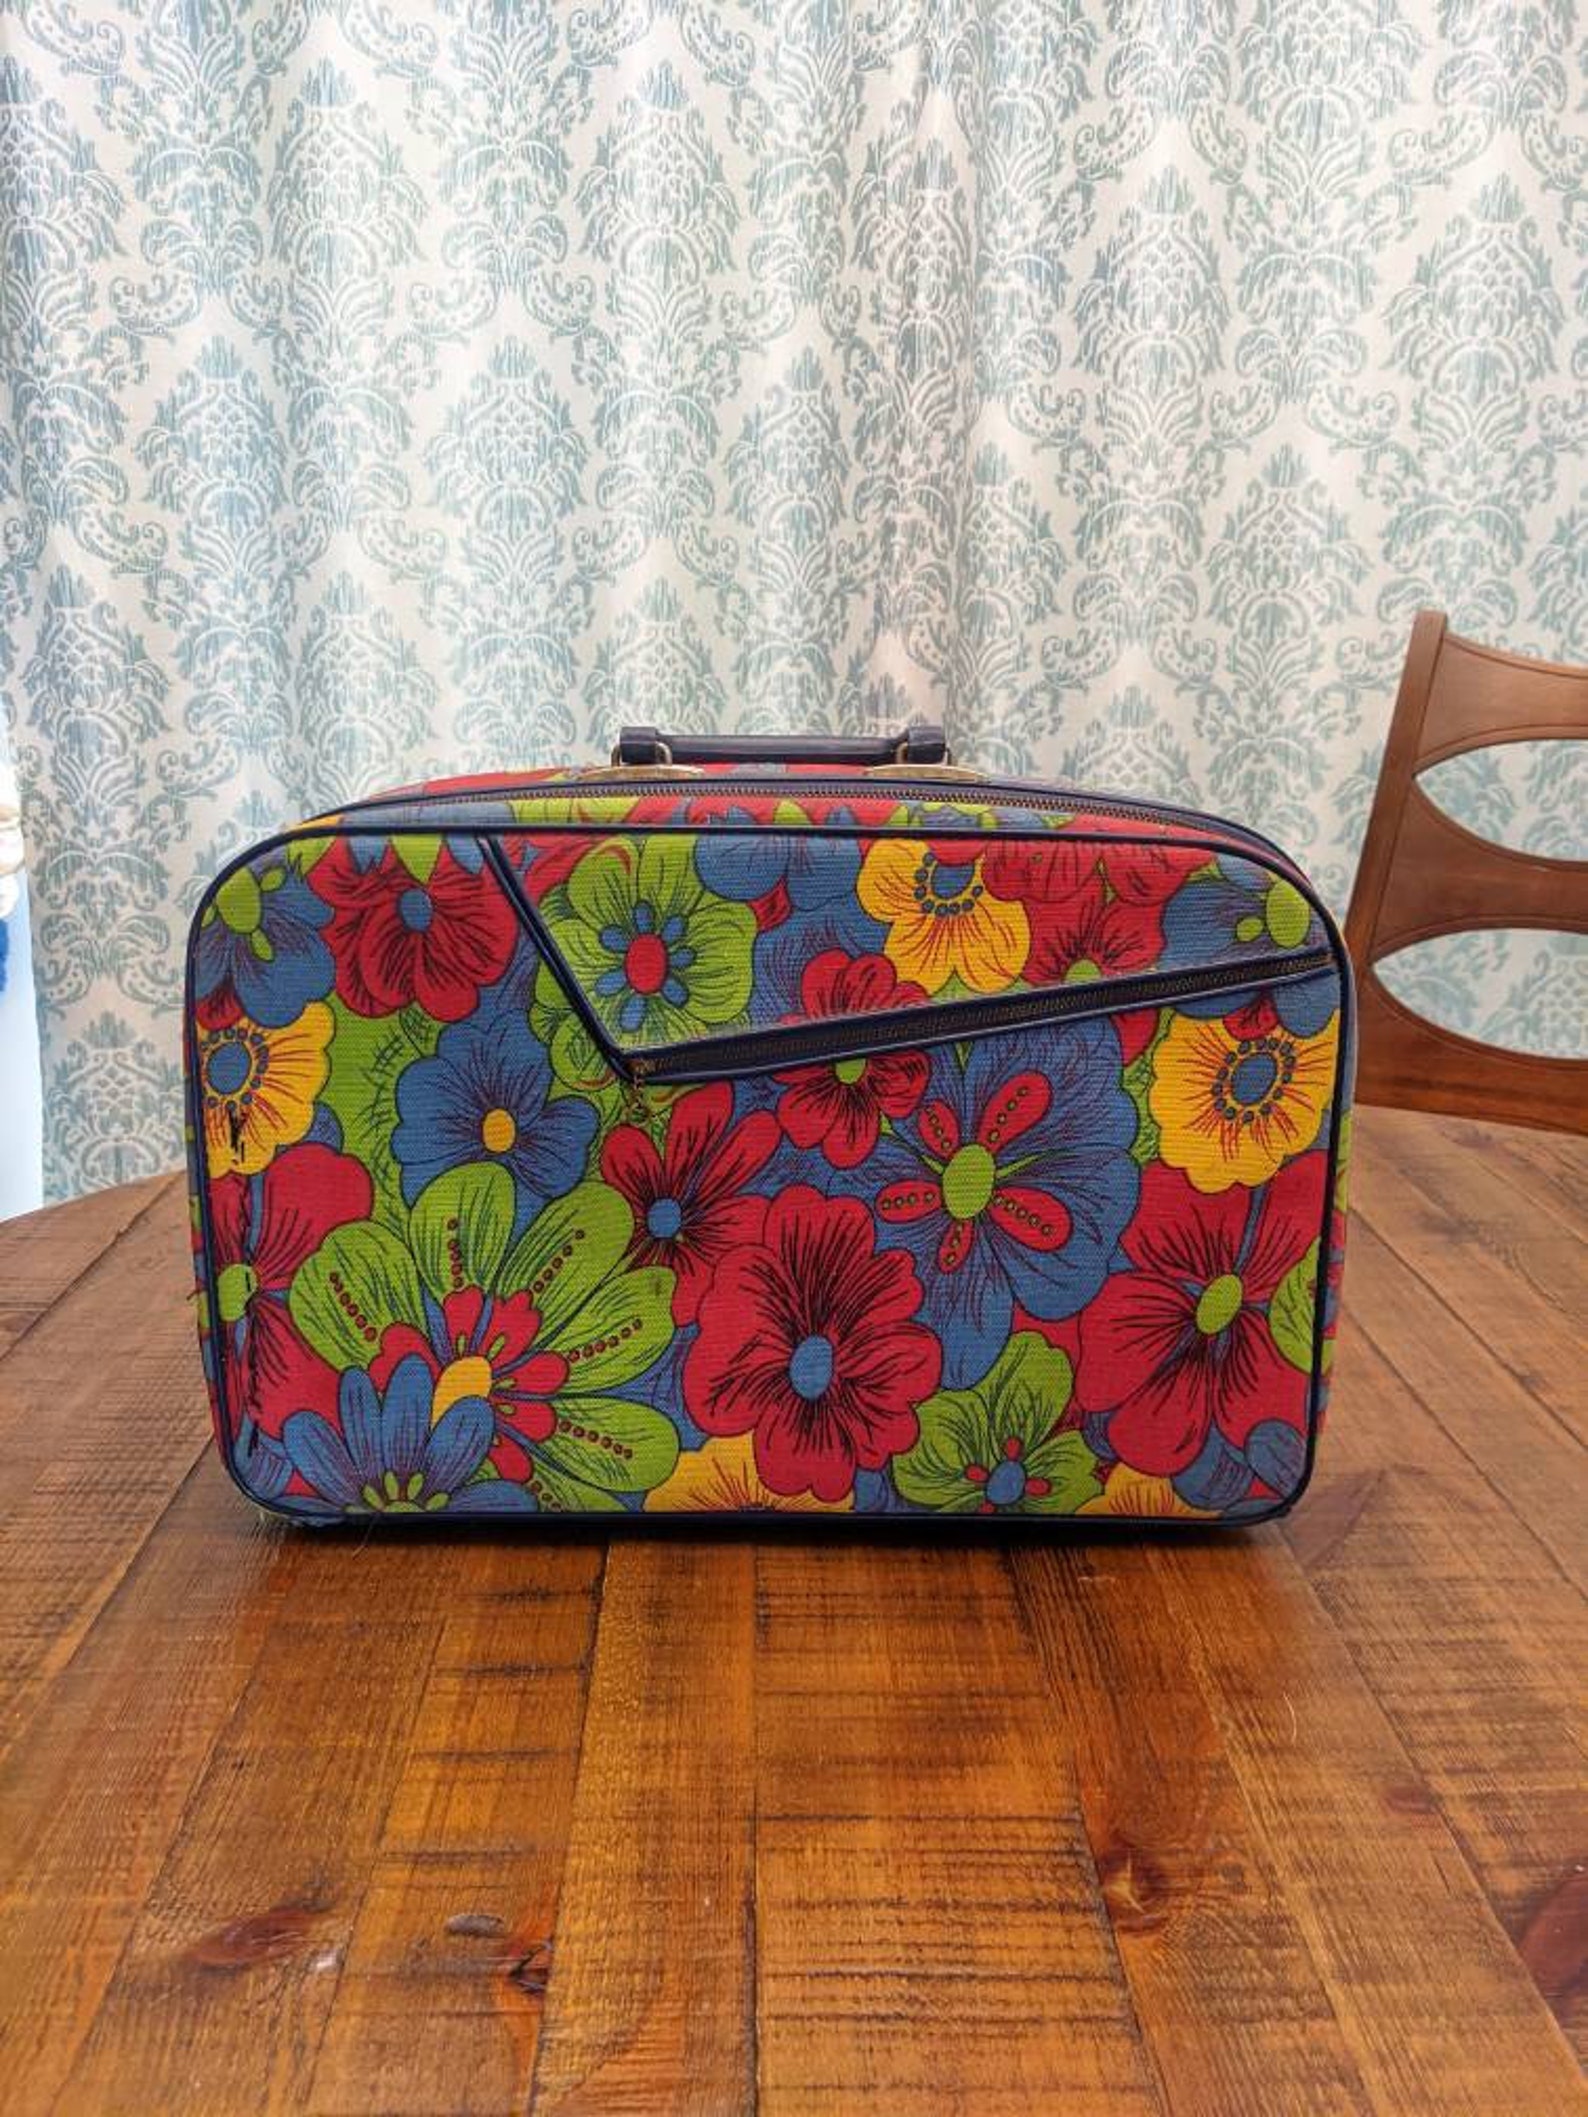 Floral Suitcase Retro Luggage Kitschy Floral Luggage Flower - Etsy